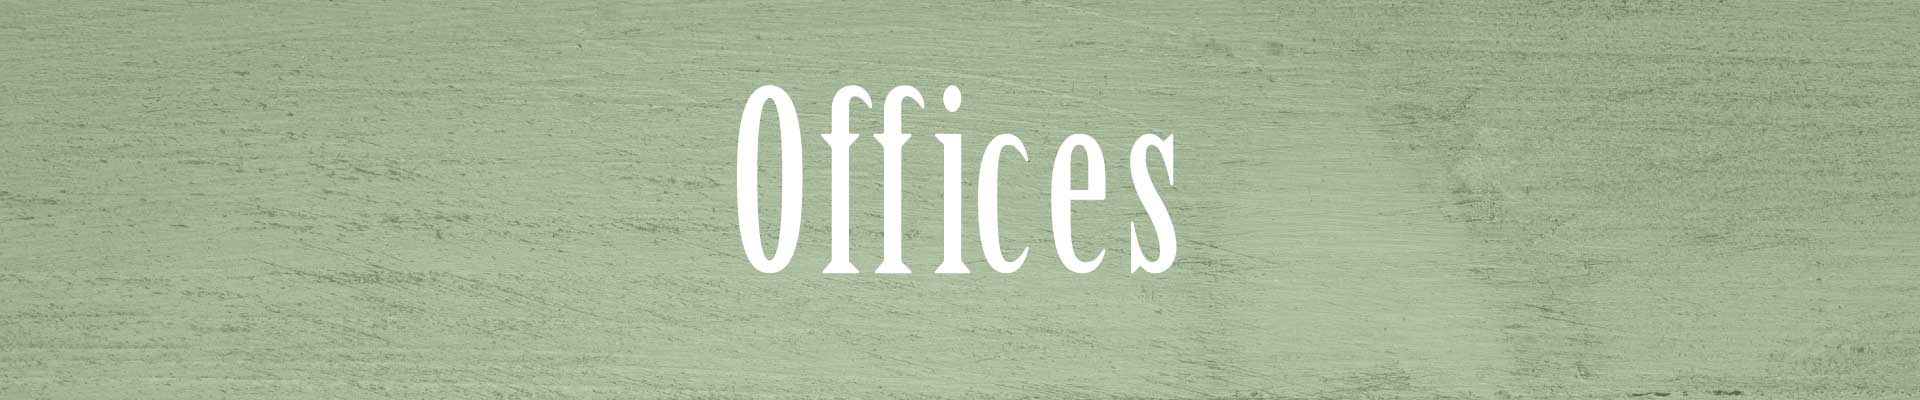 Offices page header